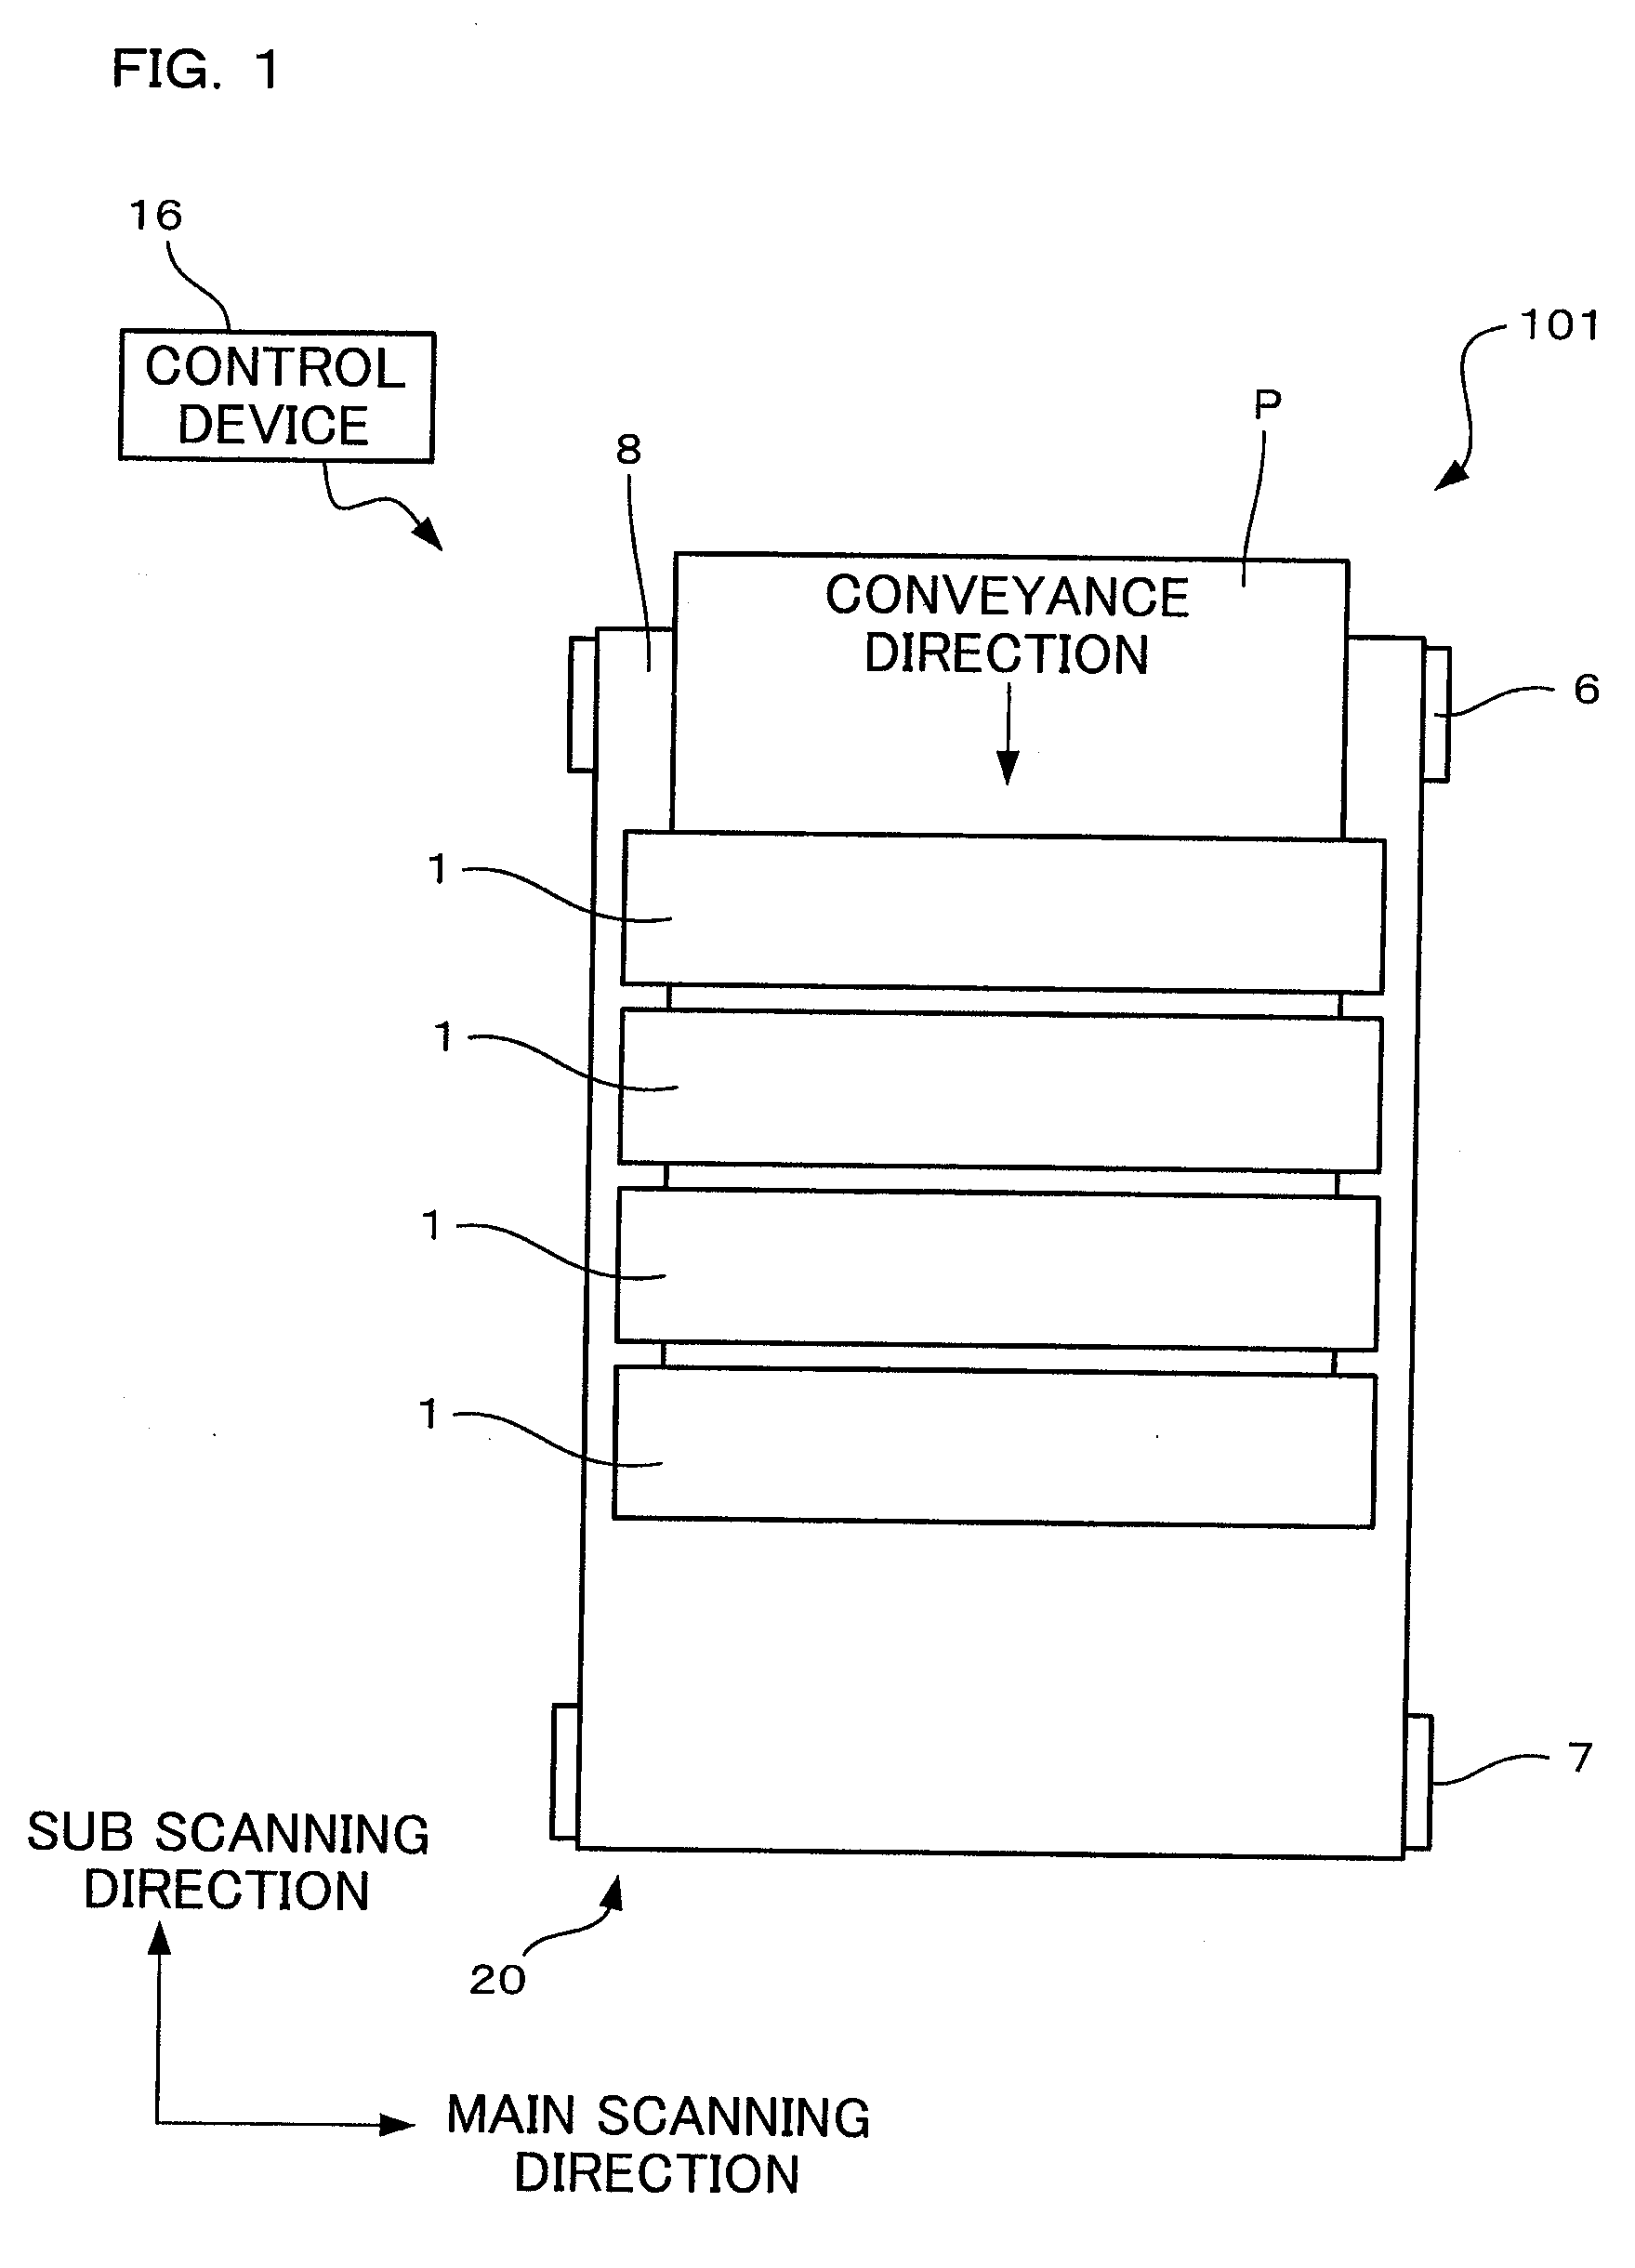 Image data processing apparatus and liquid ejection apparatus